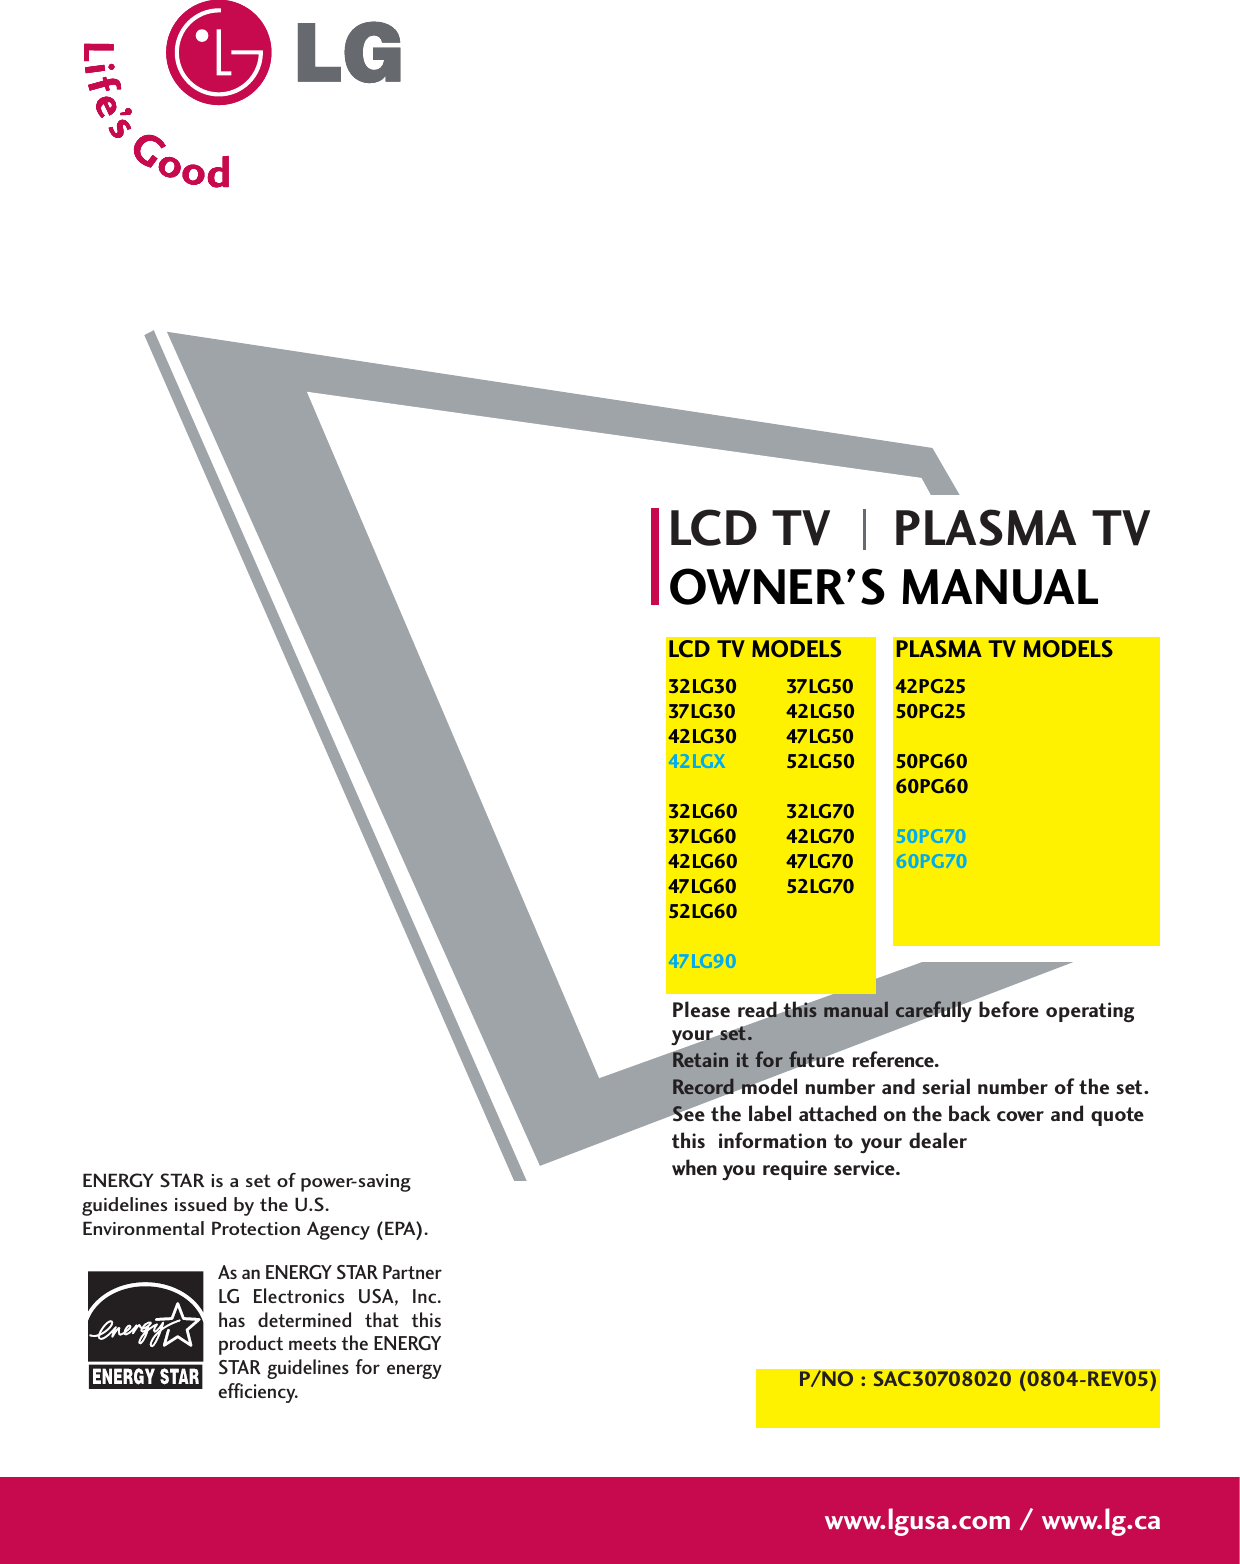 Please read this manual carefully before operatingyour set. Retain it for future reference.Record model number and serial number of the set. See the label attached on the back cover and quote this  information to your dealer when you require service.LCD TV PLASMA TVOWNER’S MANUALLCD TV MODELS32LG30 37LG5037LG30 42LG5042LG30 47LG5042LGX 52LG5032LG60 32LG7037LG60 42LG7042LG60 47LG7047LG60 52LG7052LG6047LG90PLASMA TV MODELS42PG2550PG2550PG6060PG6050PG7060PG70P/NO : SAC30708020 (0804-REV05)www.lgusa.com / www.lg.caAs an ENERGY STAR PartnerLG  Electronics  USA,  Inc.has  determined  that  thisproduct meets the ENERGYSTAR guidelines for energyefficiency.ENERGY STAR is a set of power-savingguidelines issued by the U.S.Environmental Protection Agency (EPA).